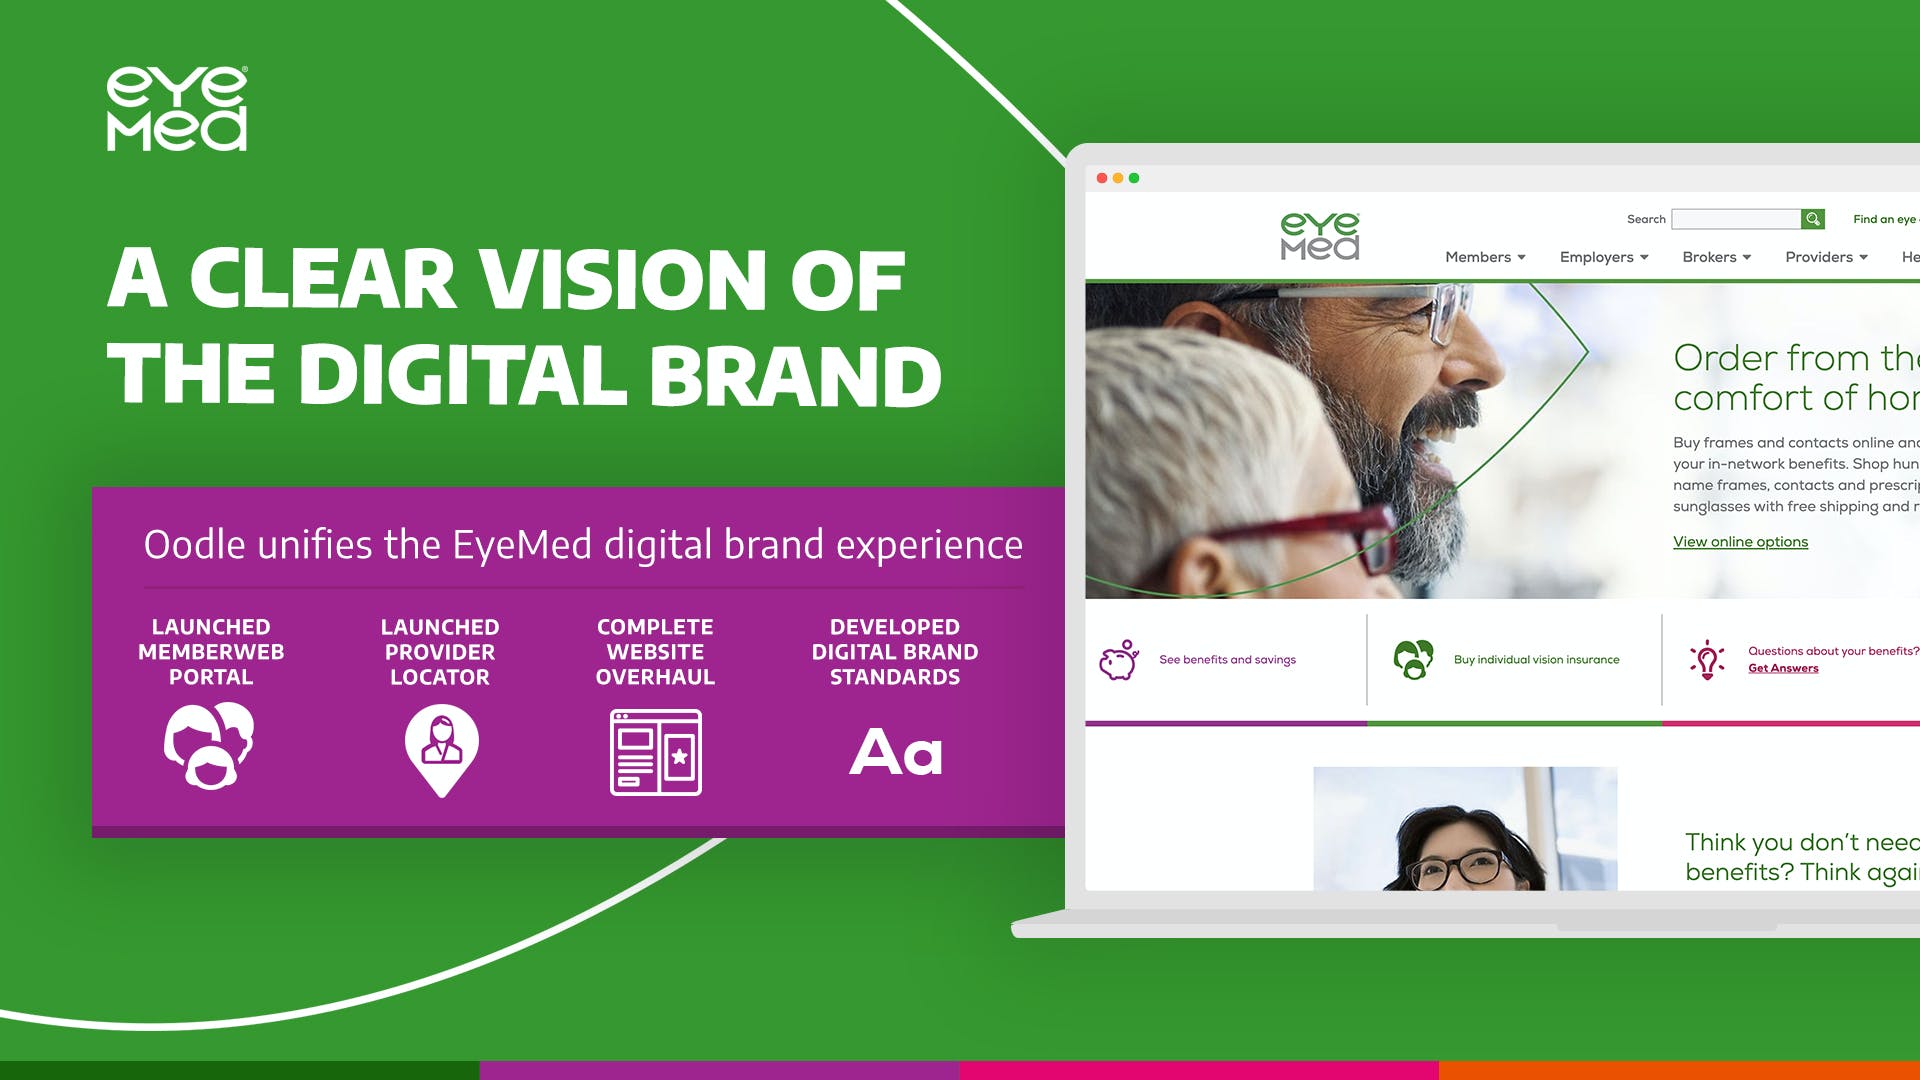 EyeMed - A clear vision of the digital brand